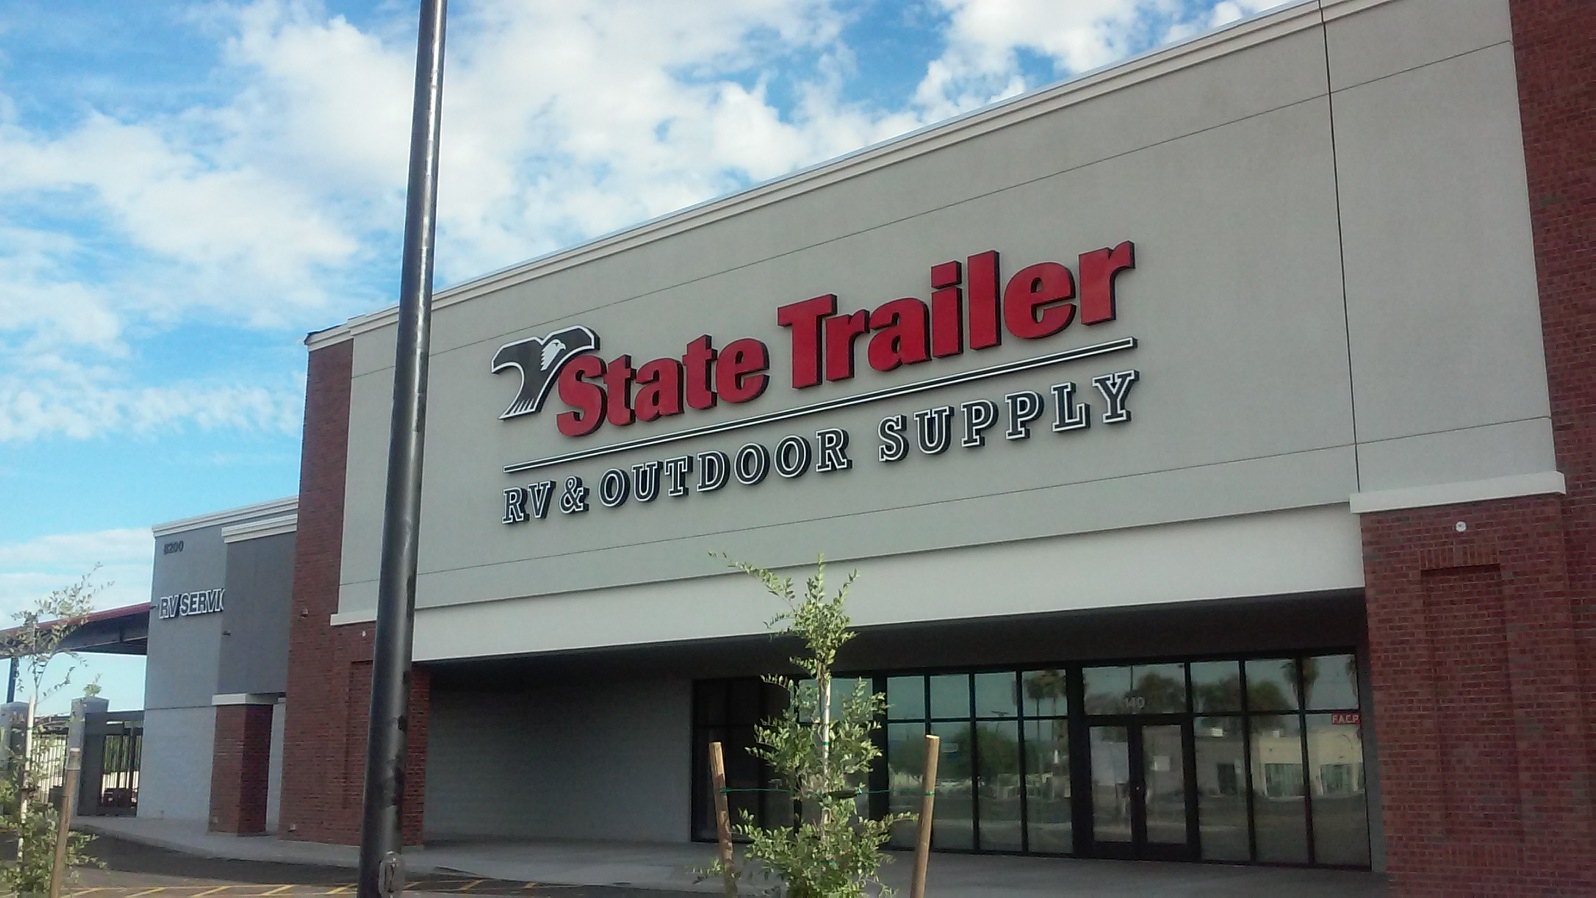 State Trailer RV & Outdoor Supply Coupons near me in ...